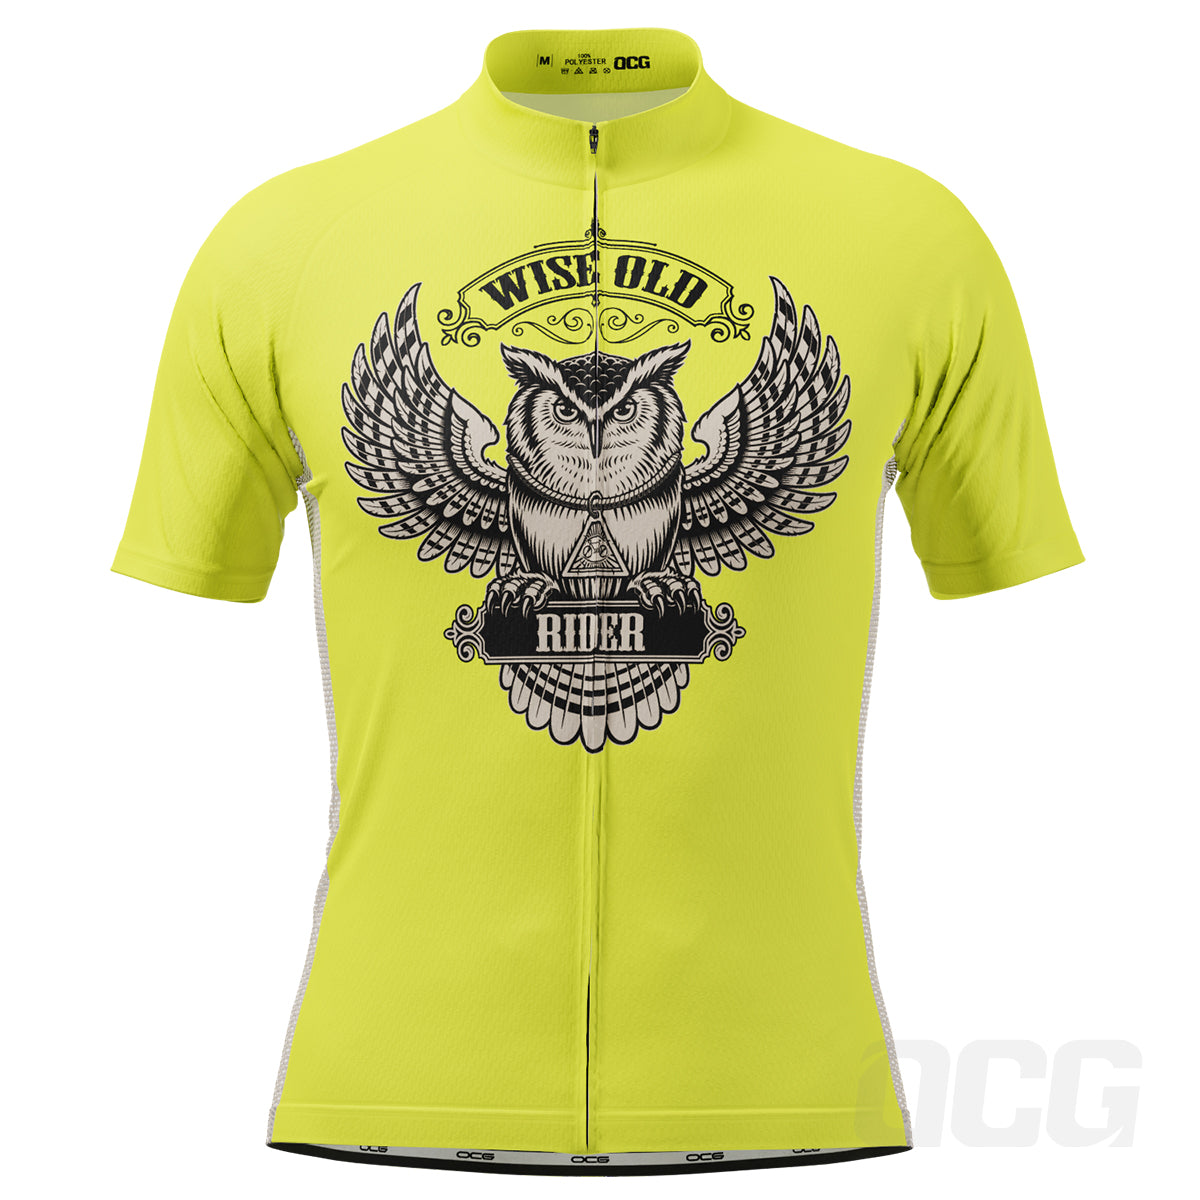 Men's Wise Old Rider Short Sleeve Cycling Jersey